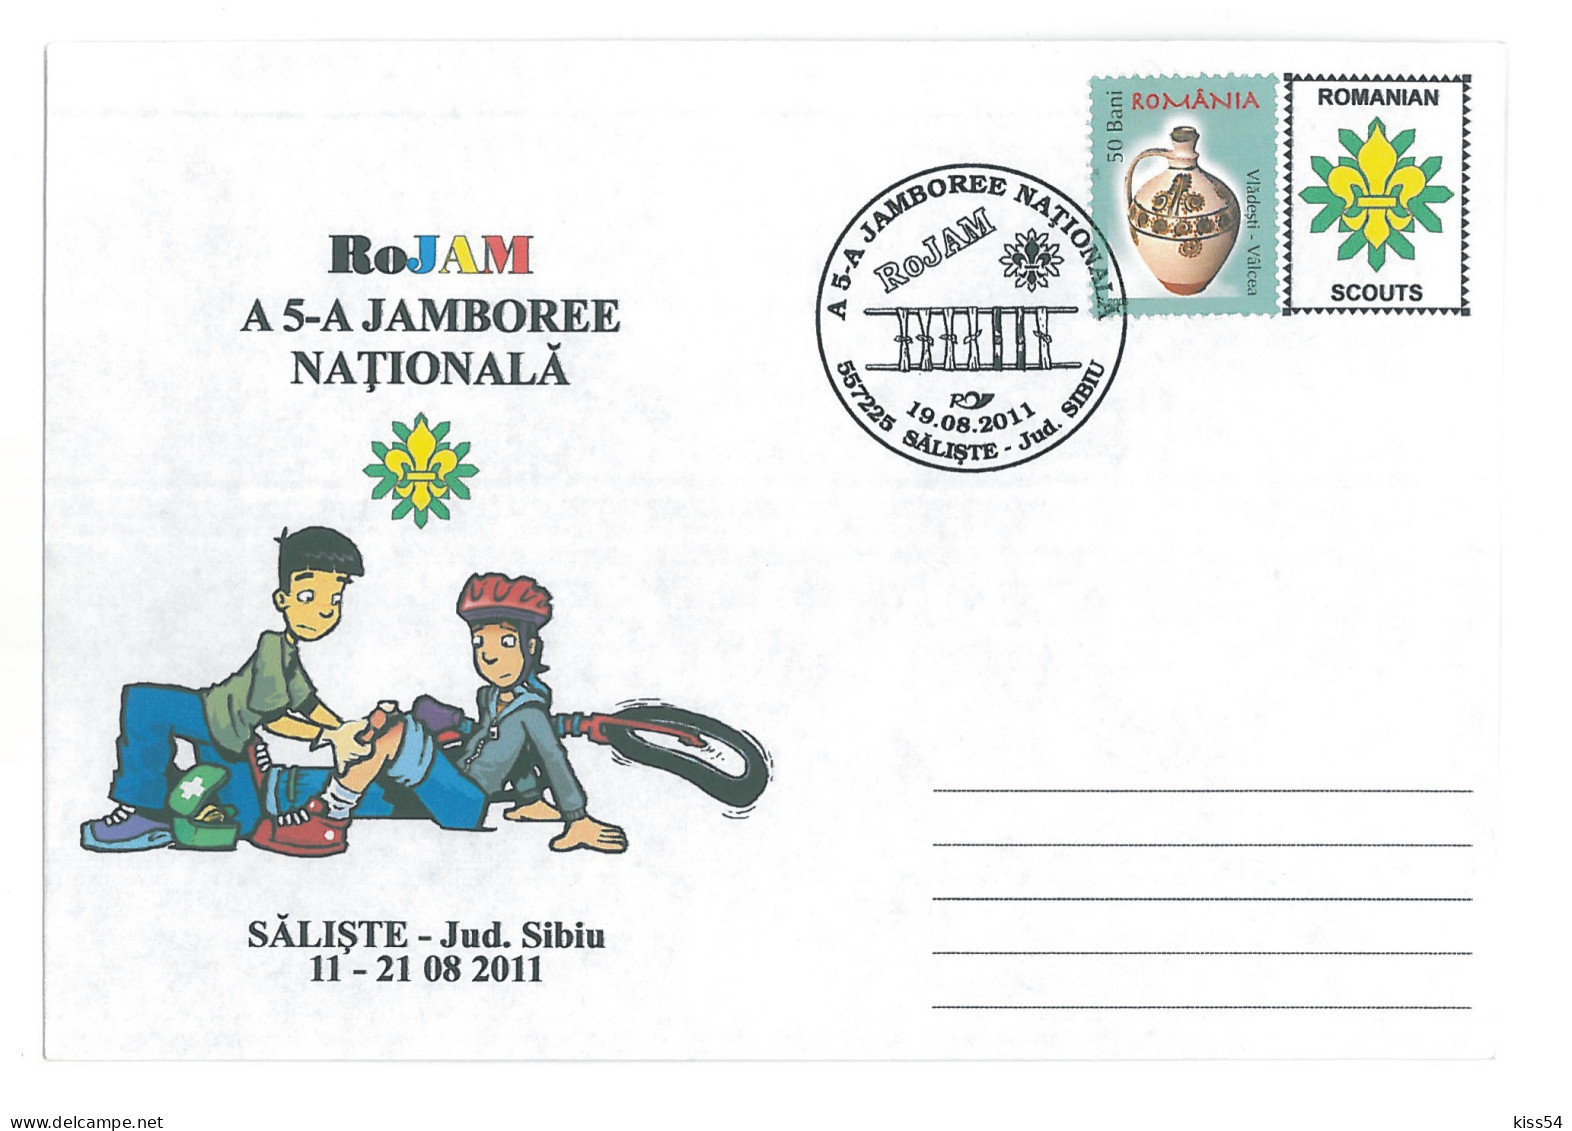 SC 46 - 1304 Scout ROMANIA, National Jamboree - Cover - Used - 2011 - Covers & Documents